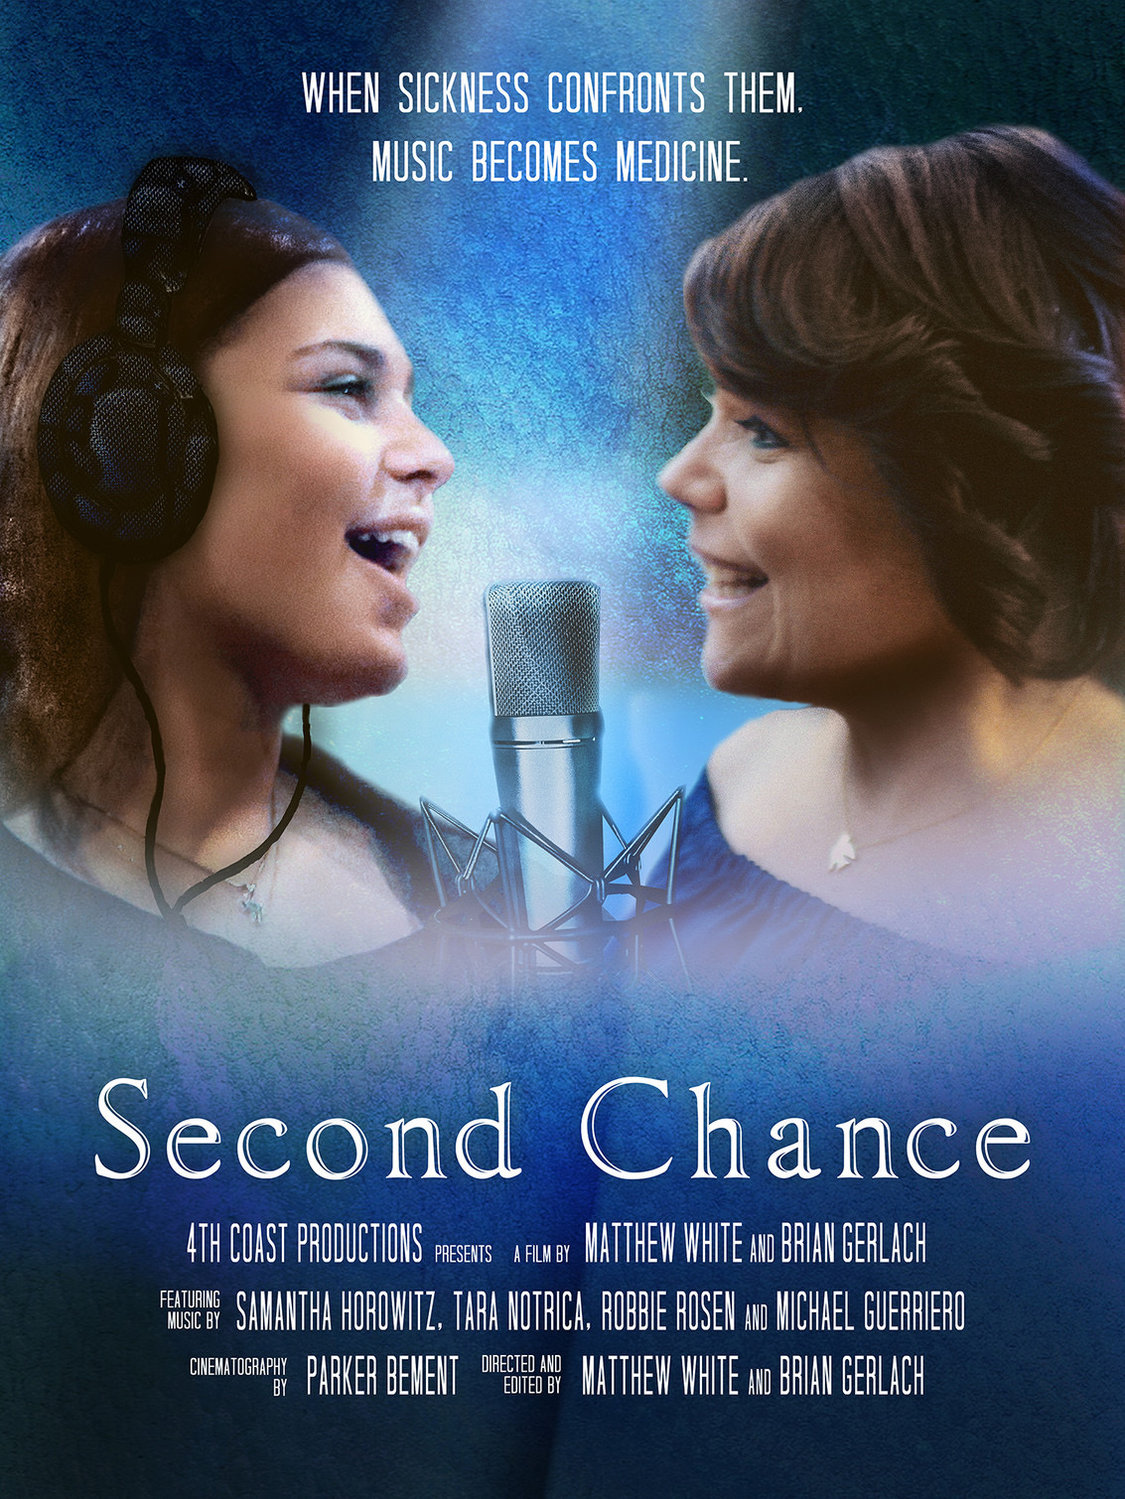 Notrica, above right, and Horowitz, her daughter, are the subjects of the documentary “Second Chance.” The album cover was created in 2020.